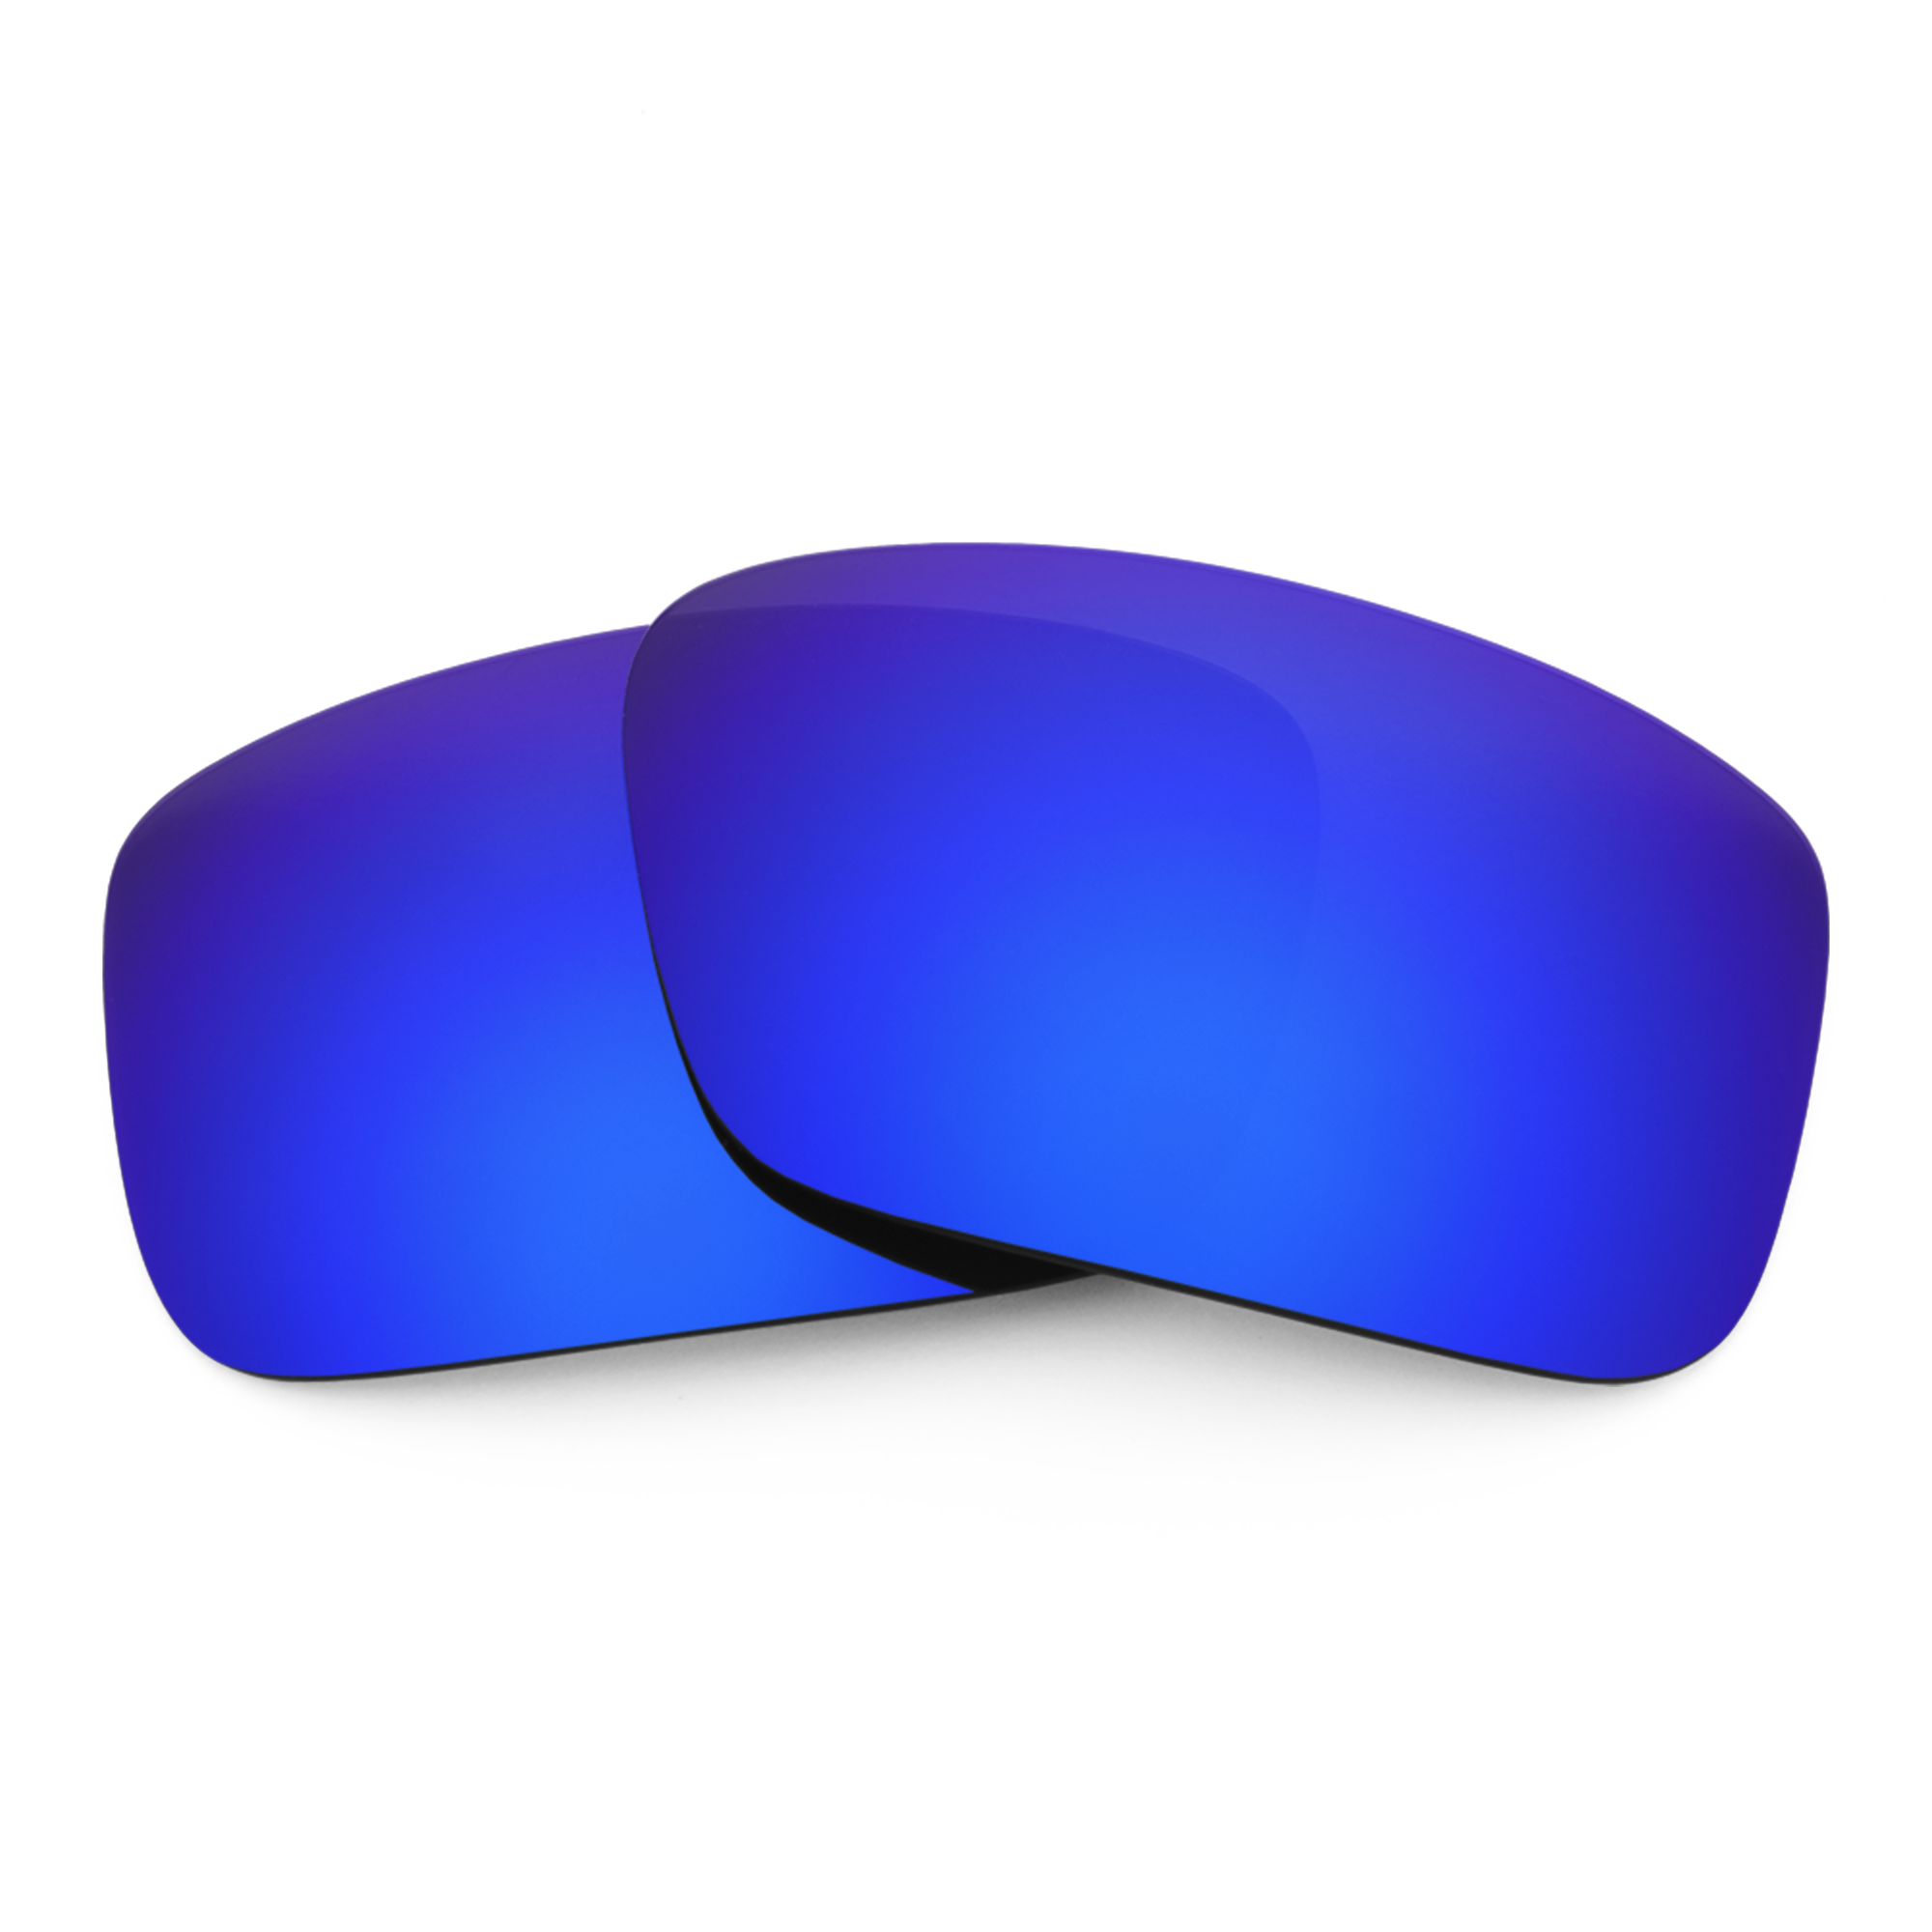 Two Tidal Blue mirrored sunglass lenses laid on top of each other.